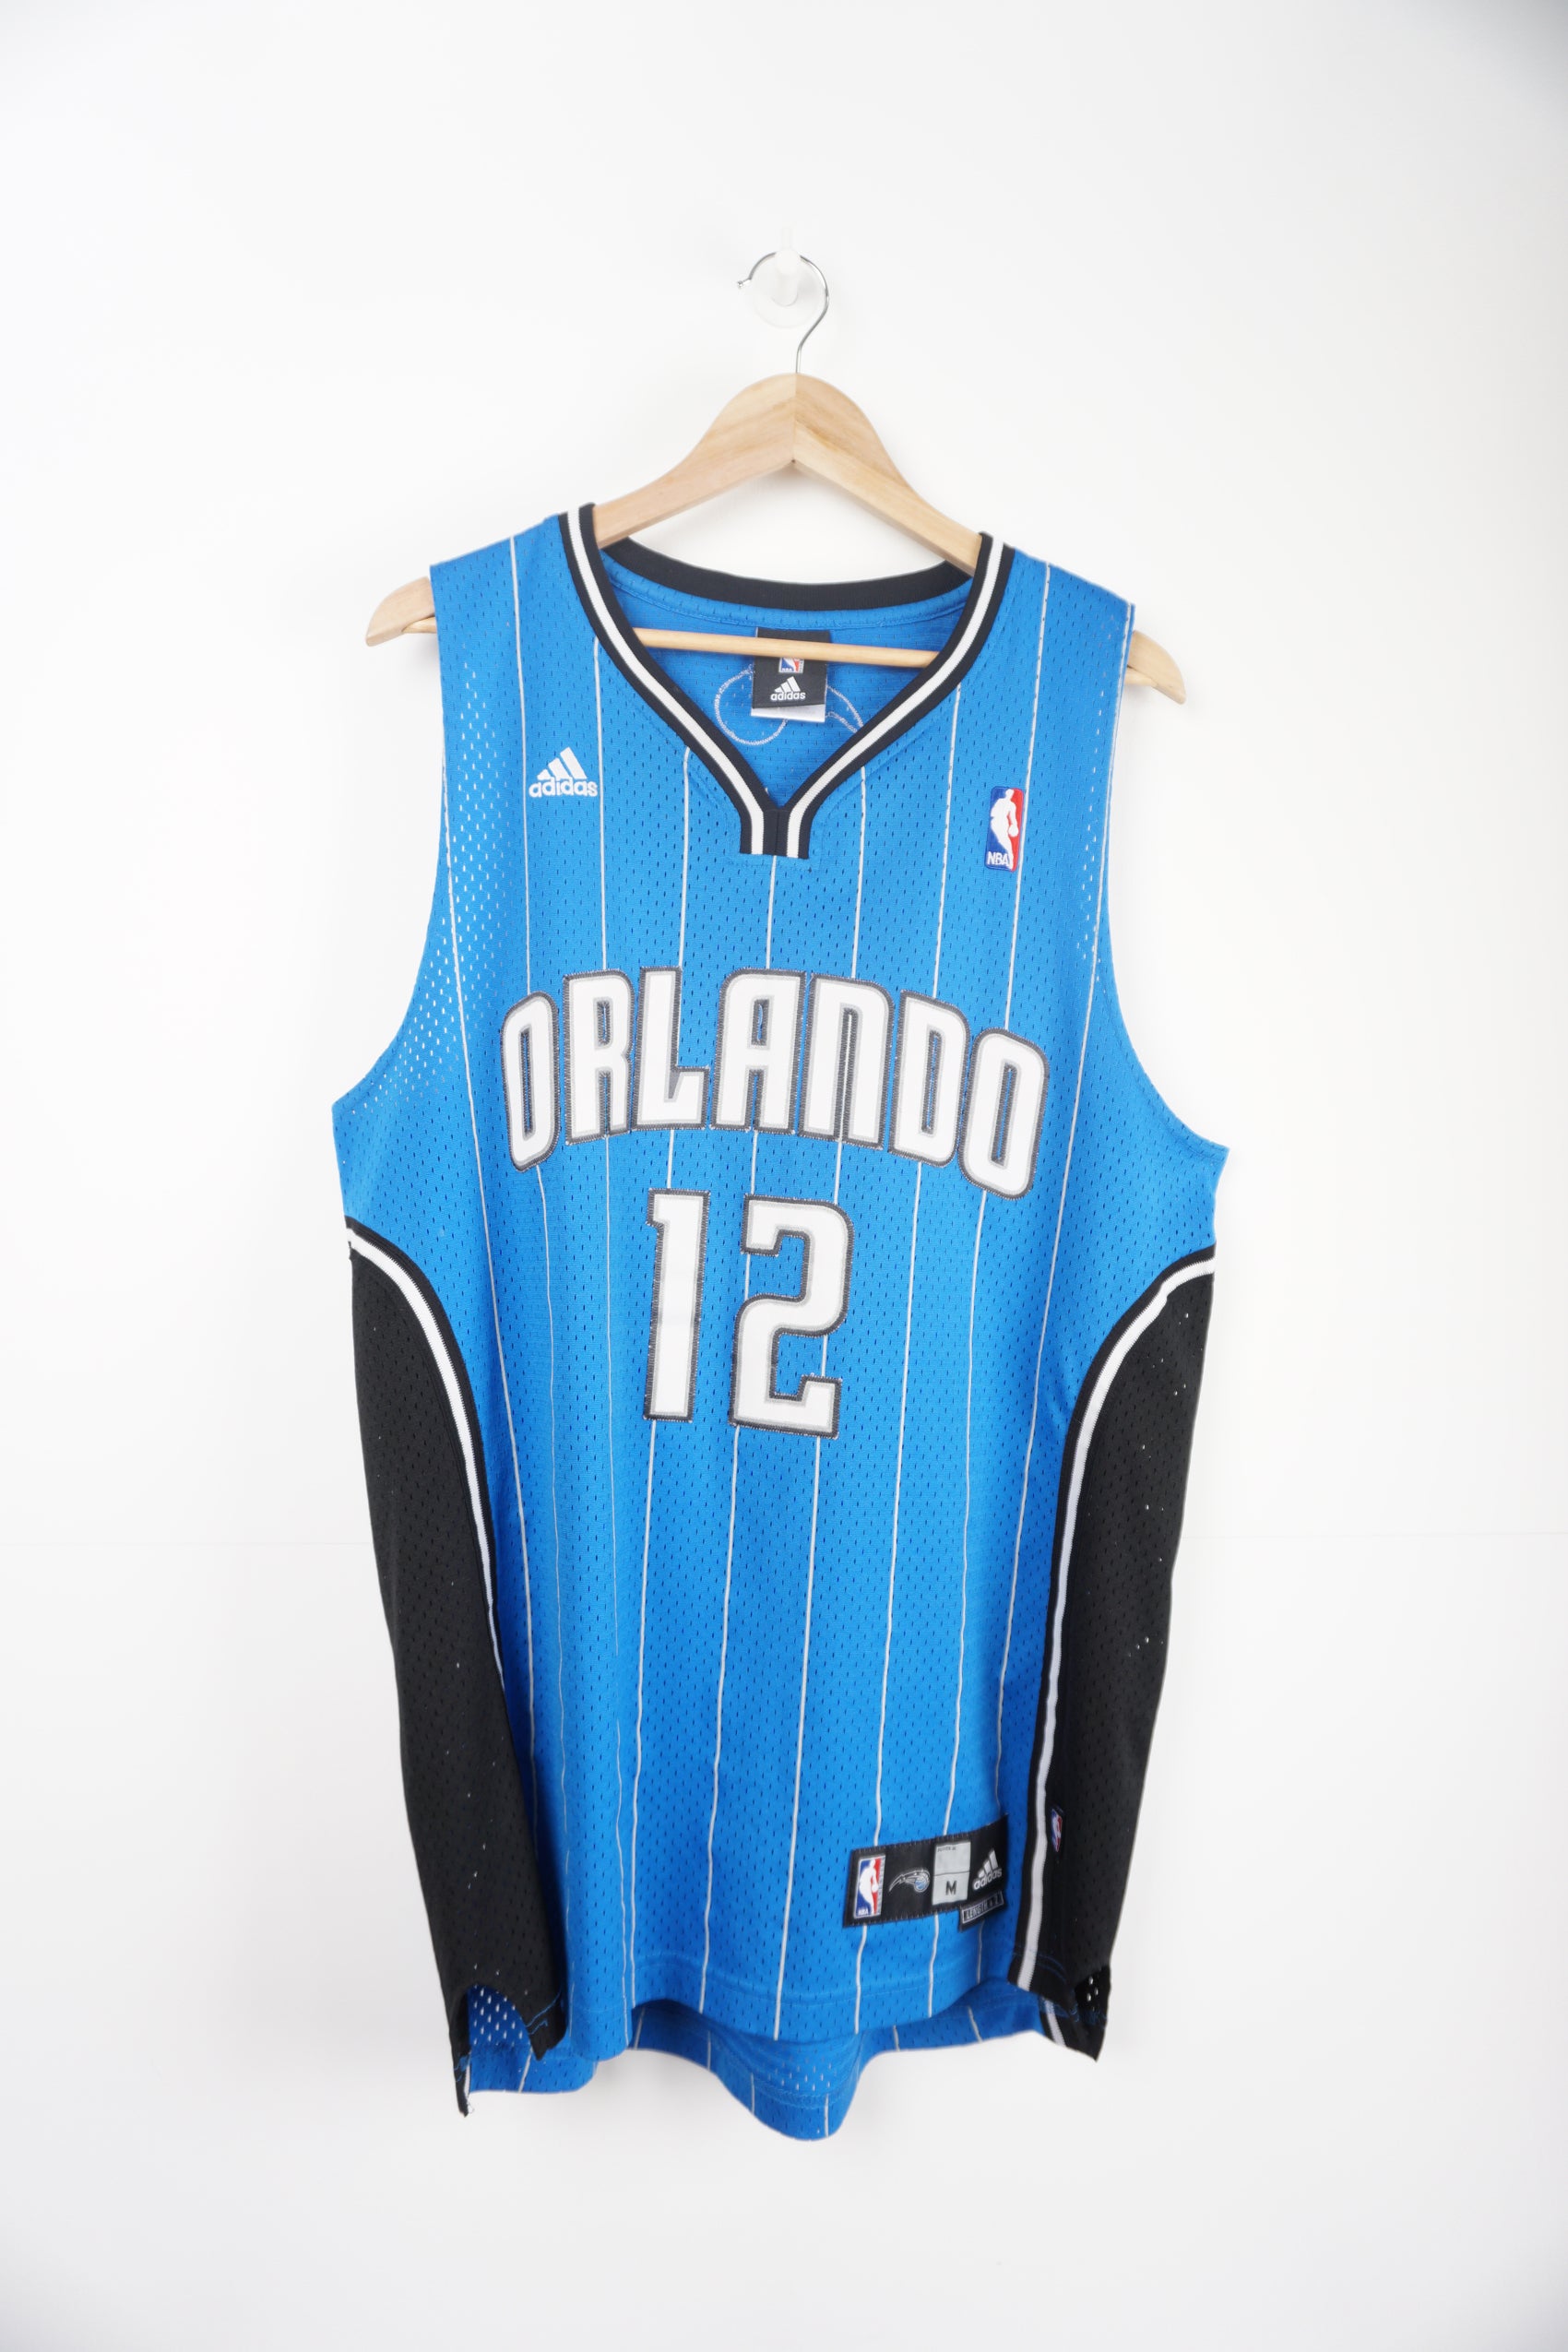 🏀 Dwight Howard Orlando Magic Jersey Size Small – The Throwback Store 🏀